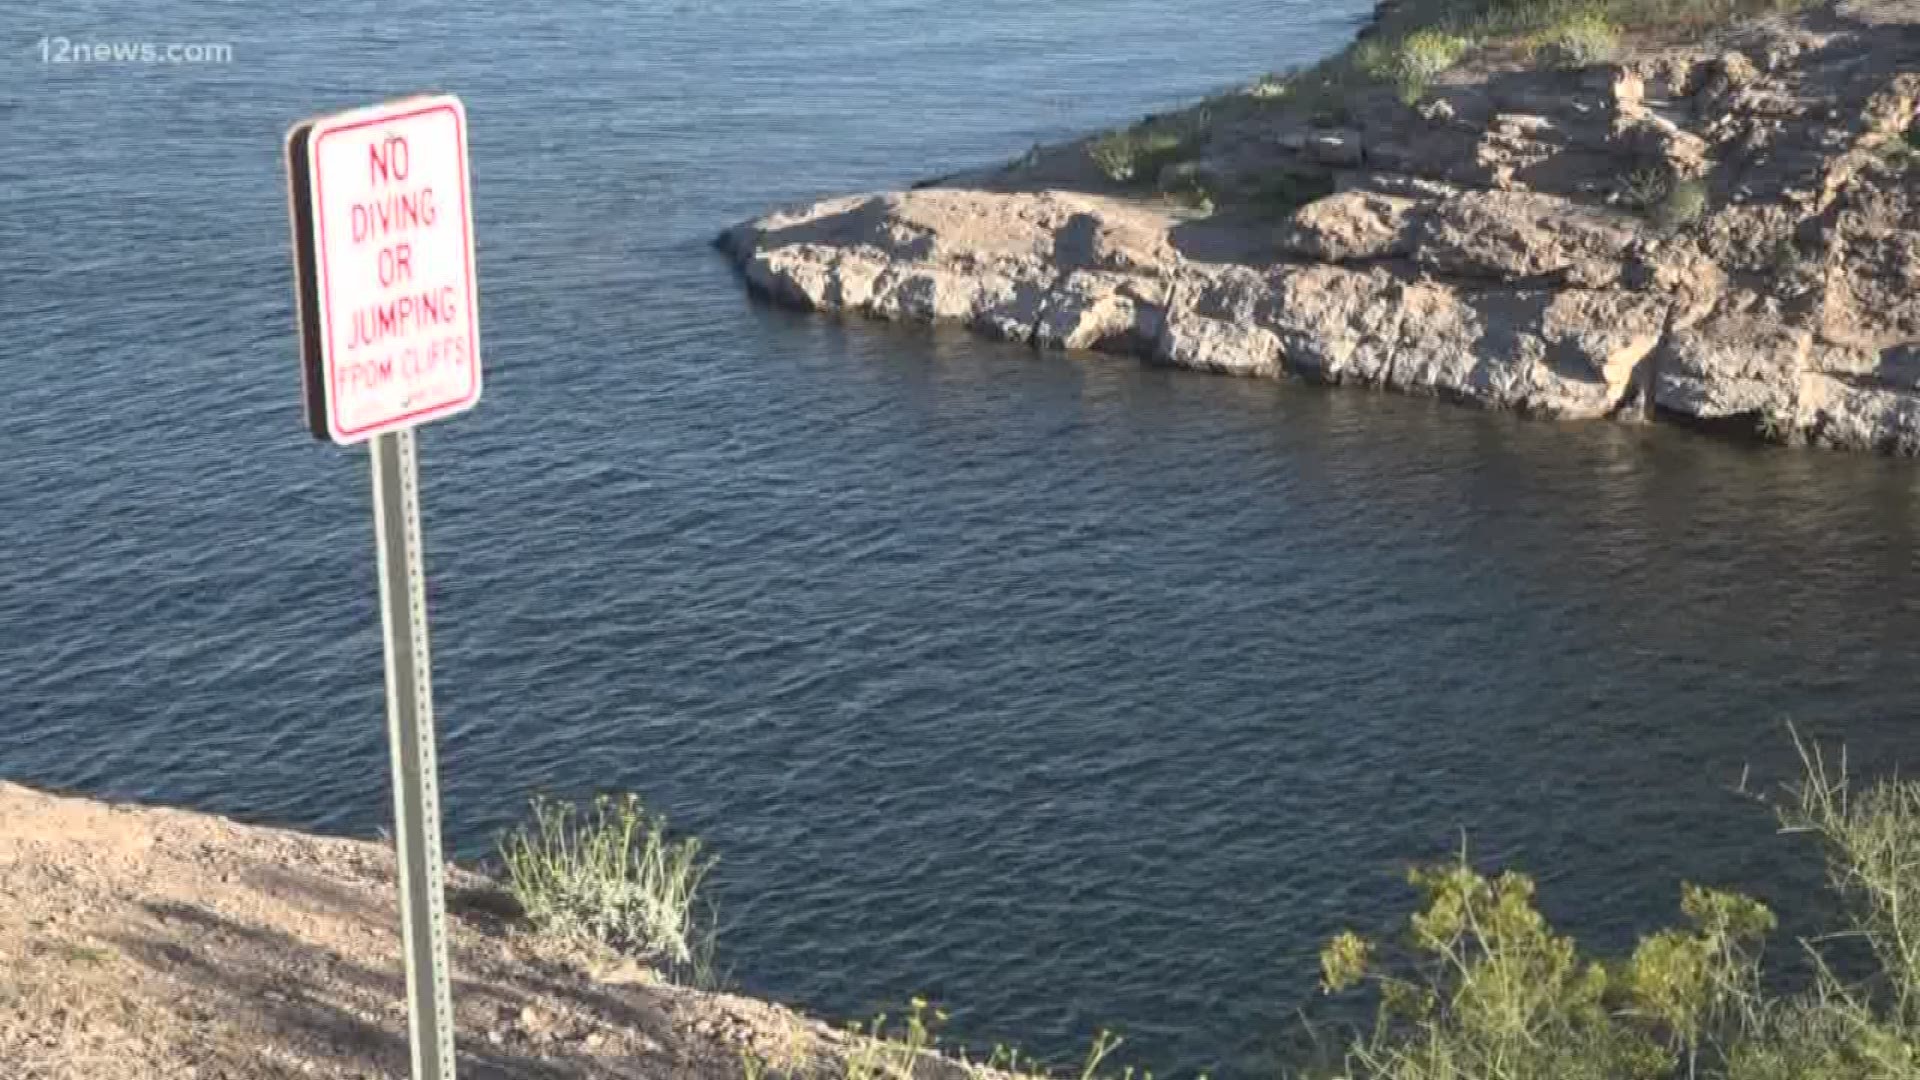 A 16-year-old boy died Friday after he was pulled from Lake Pleasant and sent to the hospital in critical condition. Two bystanders swam him to the shore and performed CPR until emergency responders arrived.